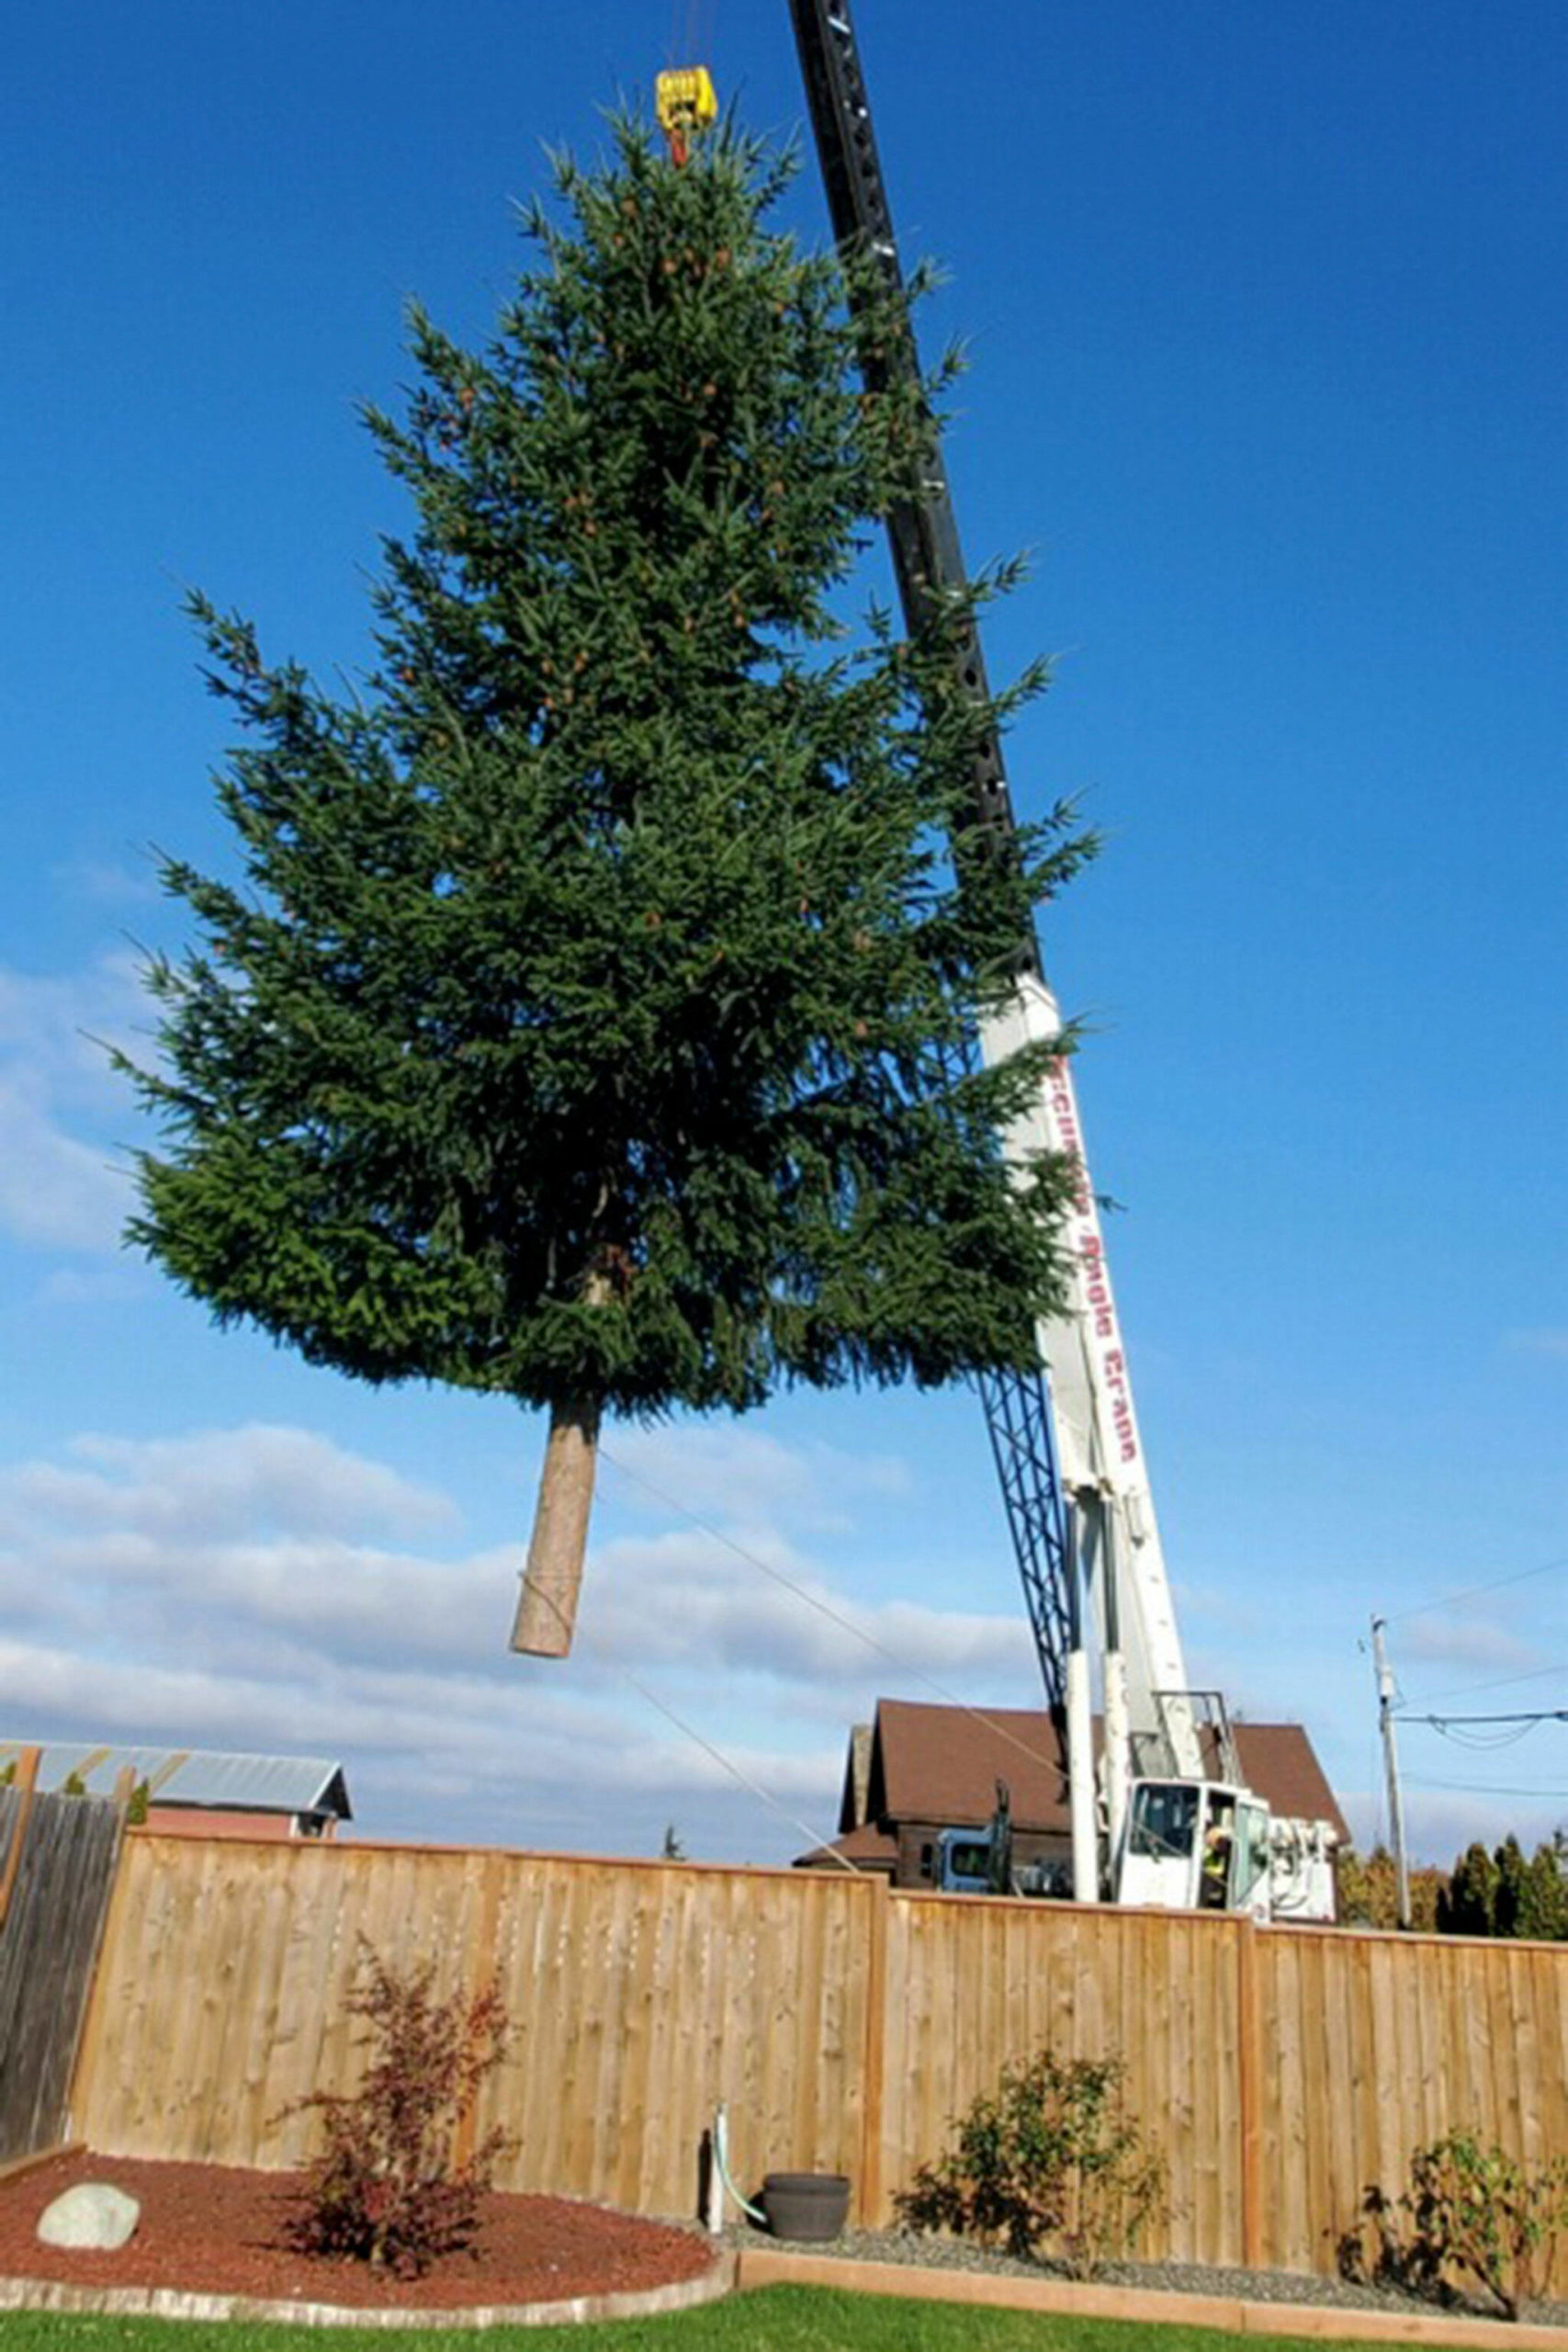 Photo courtesy of Marilyn Quinn/ Dan Goettling with Accurate Angle Crane moves a tree from a yard before placing it on a flatbed with help from a City of Sequim crew to move it to downtown Sequim on Nov. 15. The anonymous neighbor donated the tree for free saying “it’s about community.”